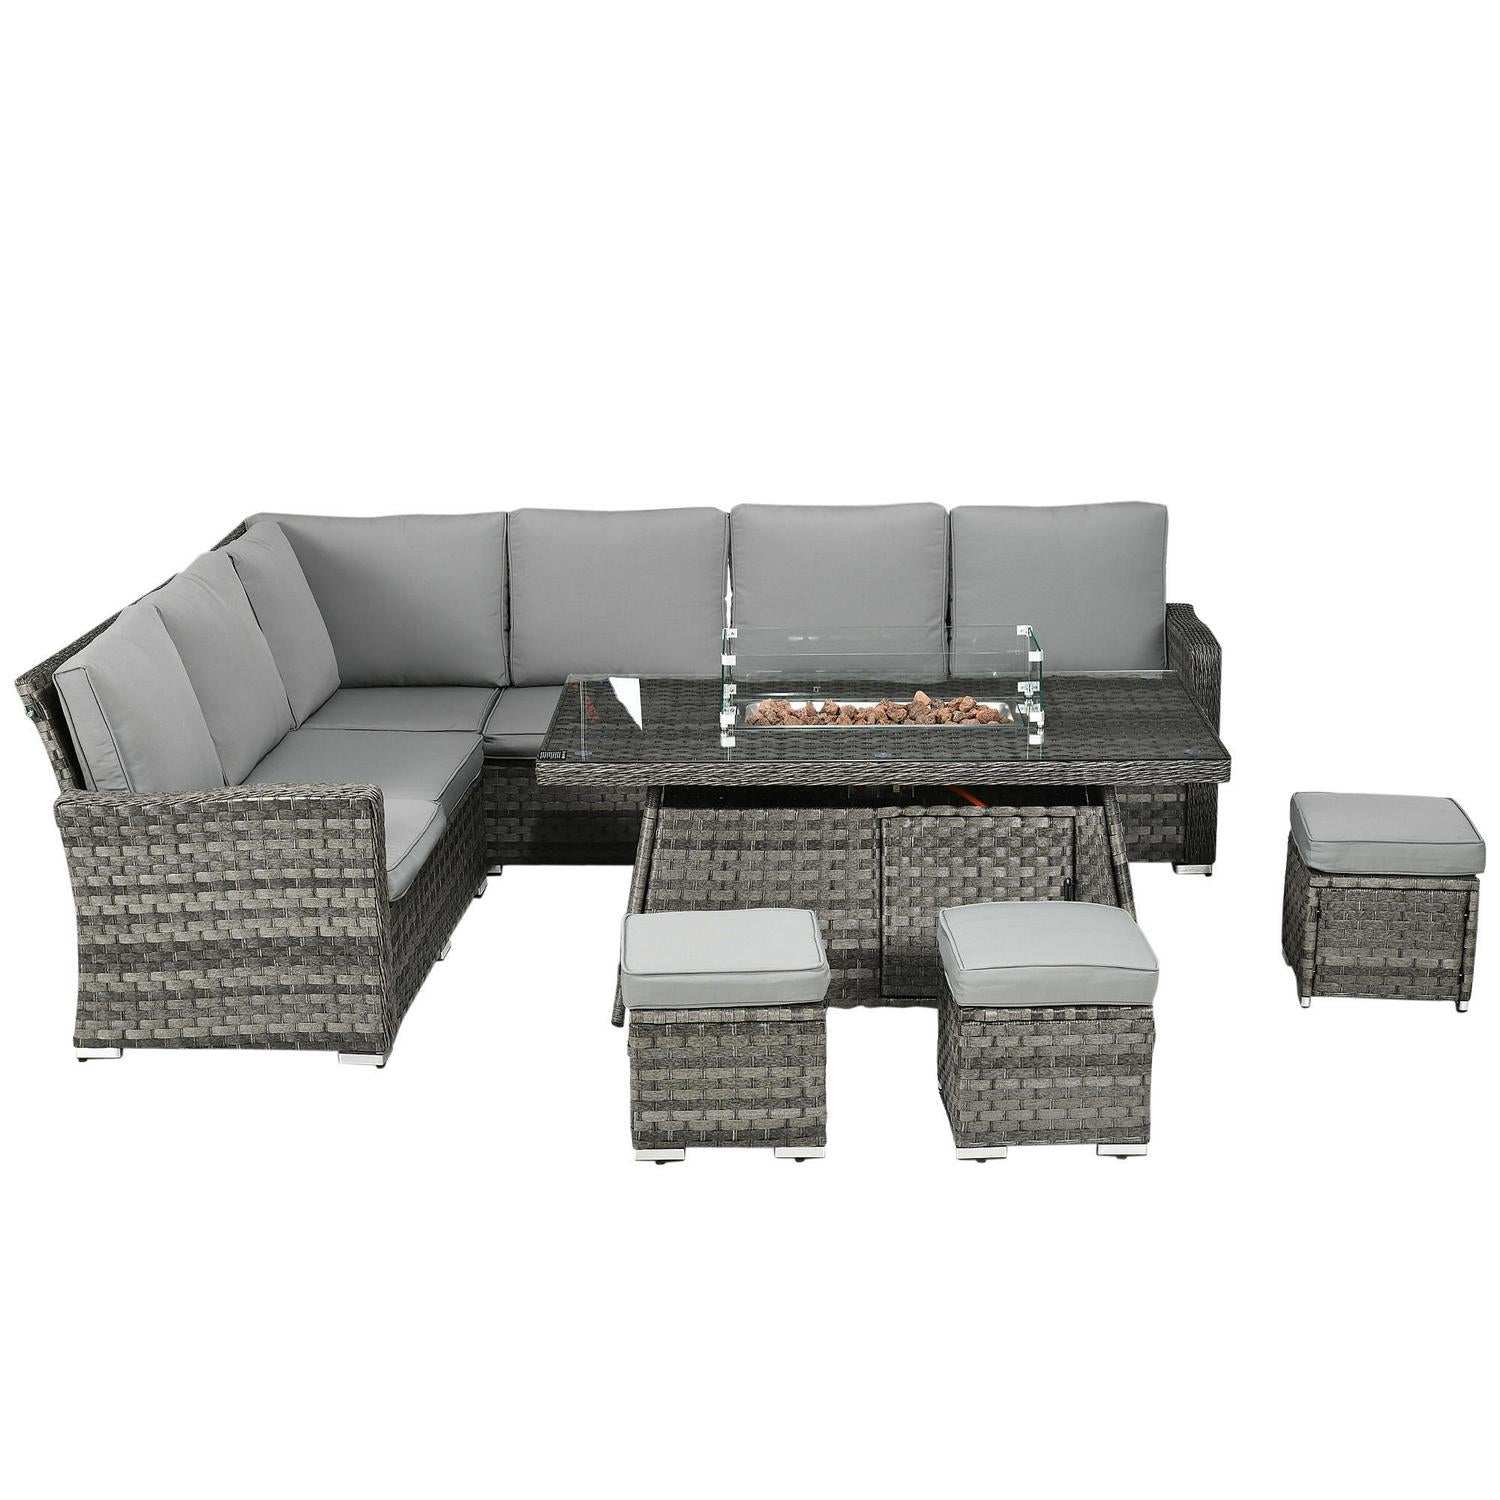 7 Pieces PE Rattan Garden Furniture Set, 50,000 BTU Gas Fire Pit Table, Double Corner Sofa And 3 Footstools, 6 Seater Sets With Cushions For Conservatory, Grey